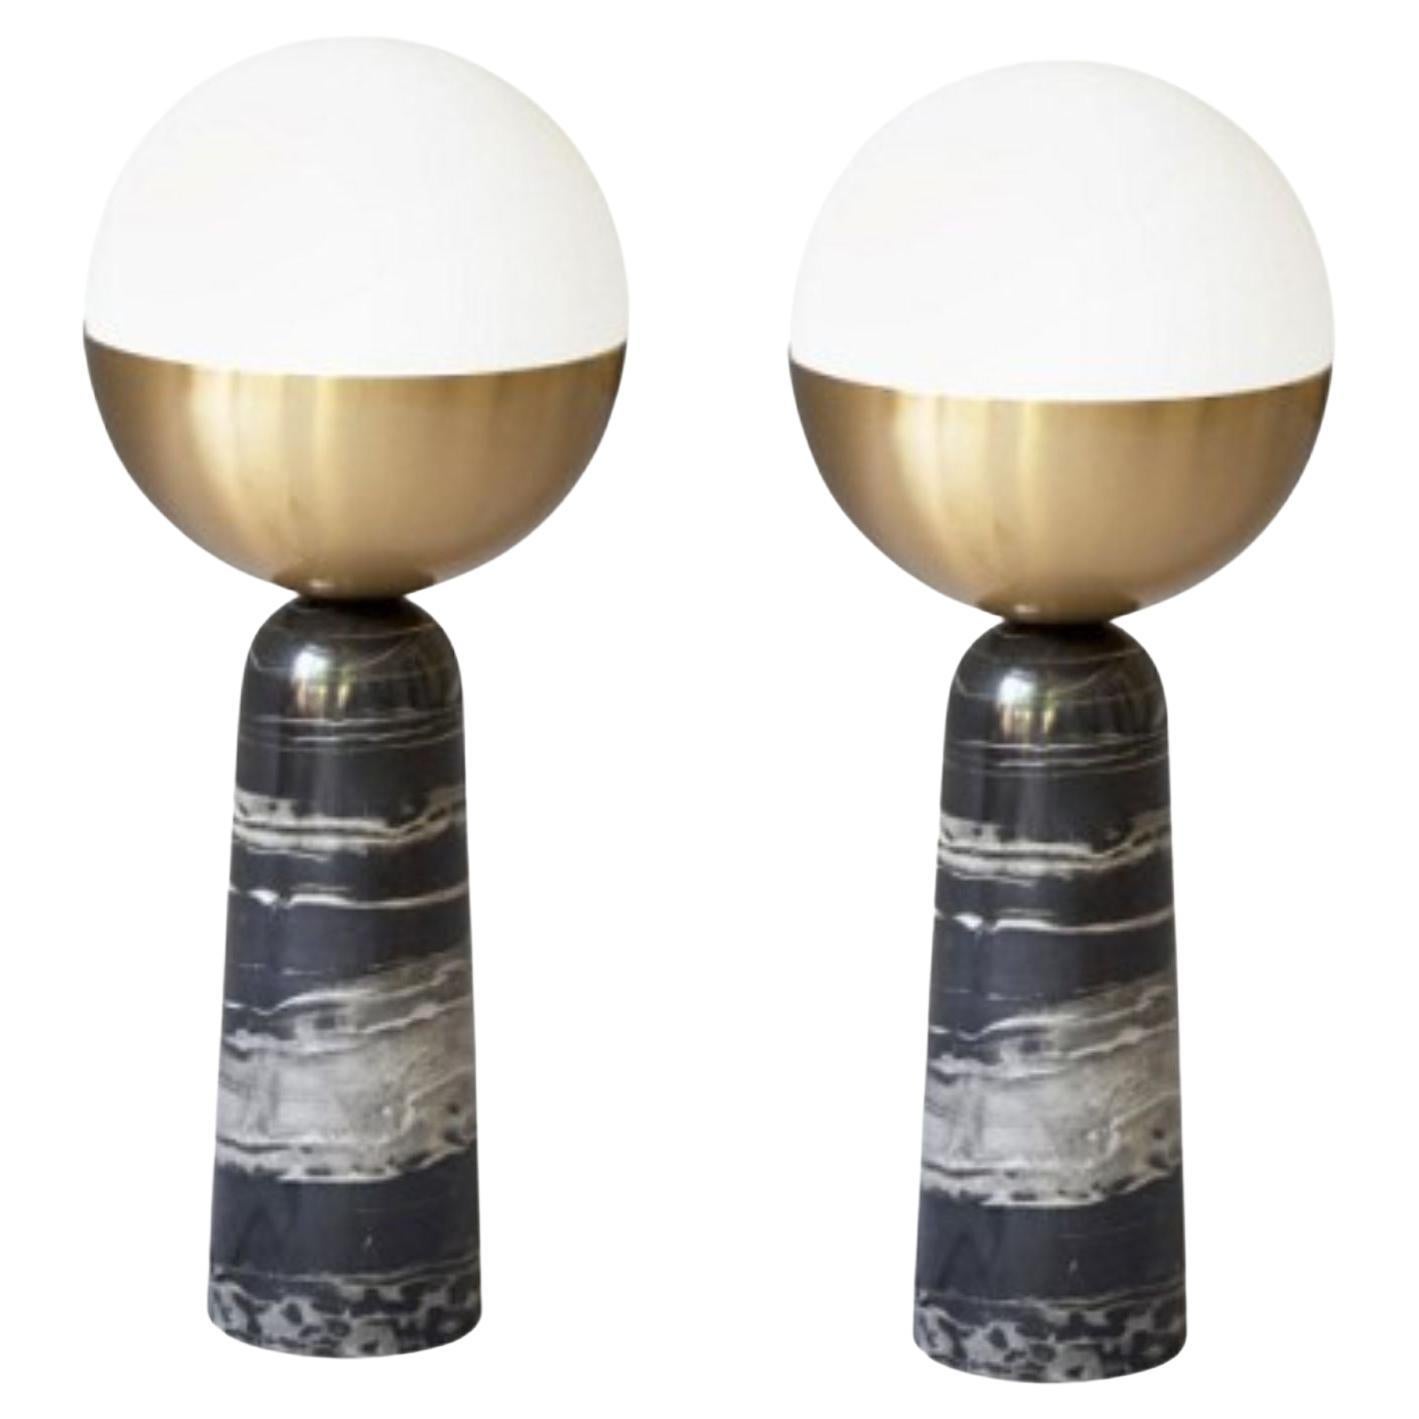 Set of 2 Brass Globe Table Lamps by Square in Circle